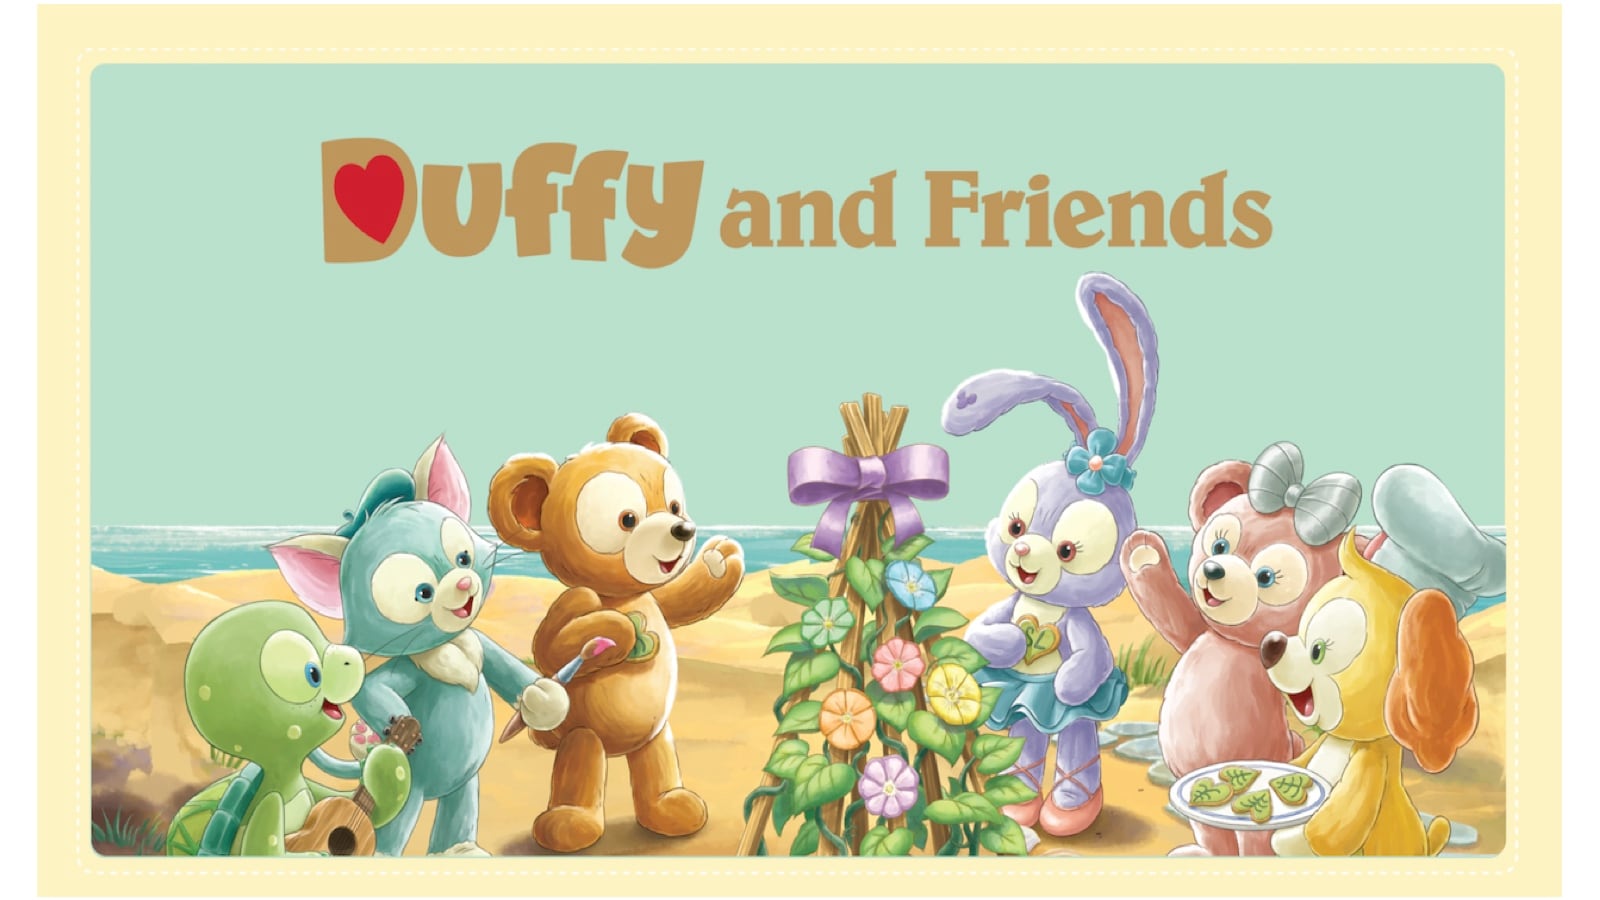 VIDEO: A Friendship-Filled Moment with Duffy & Friends Shared Around